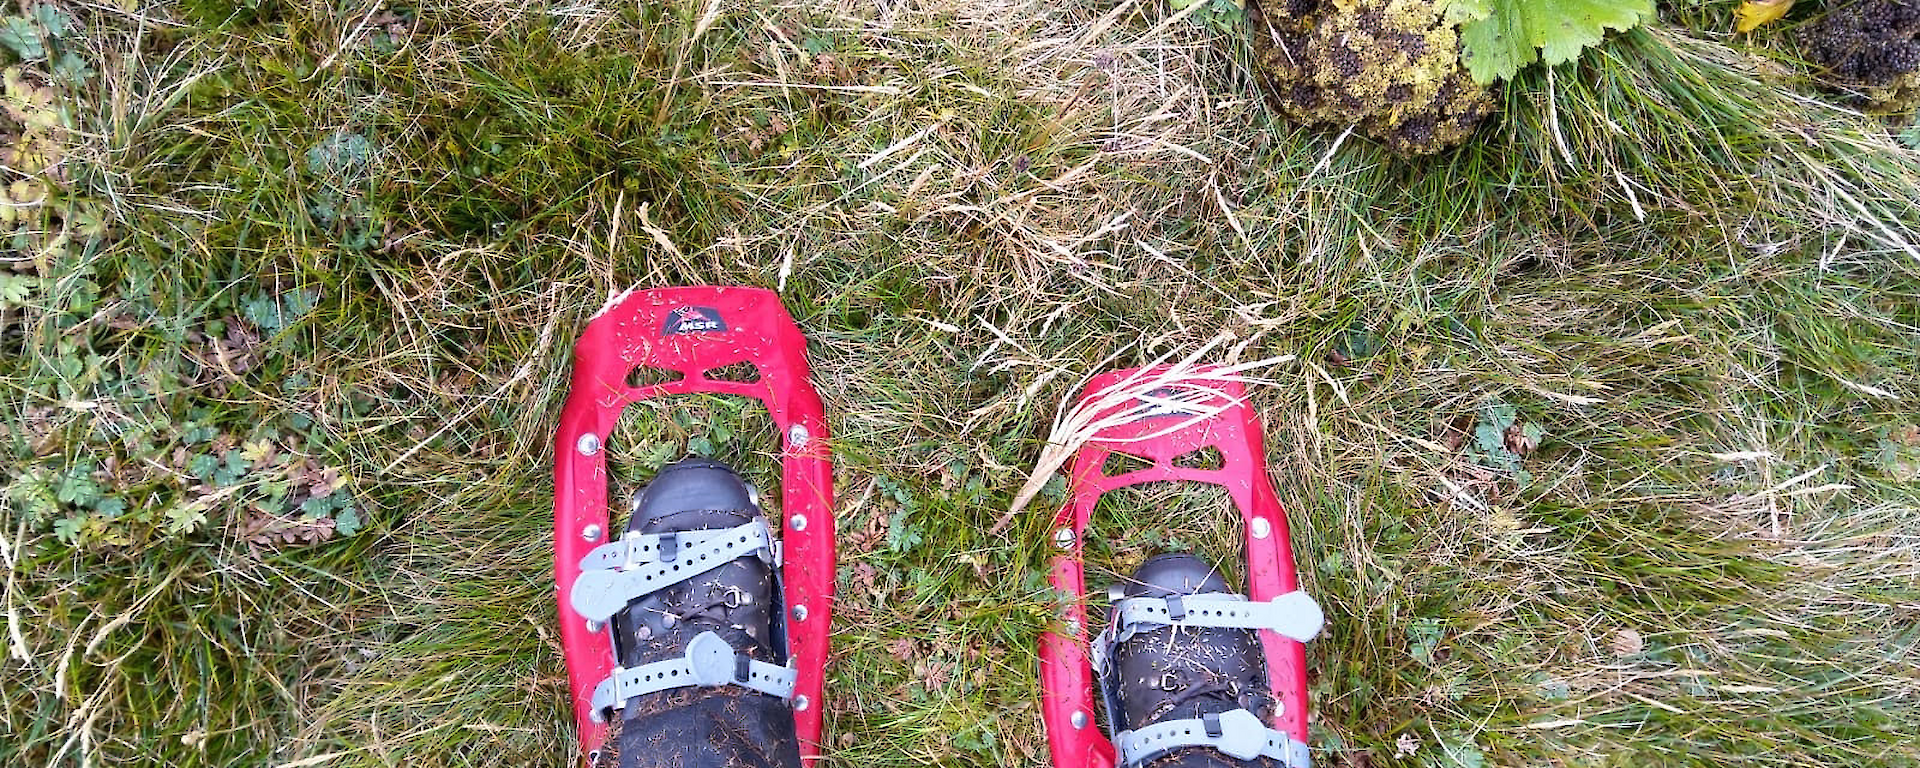 Looking down at snowshoes being worn by a ranger